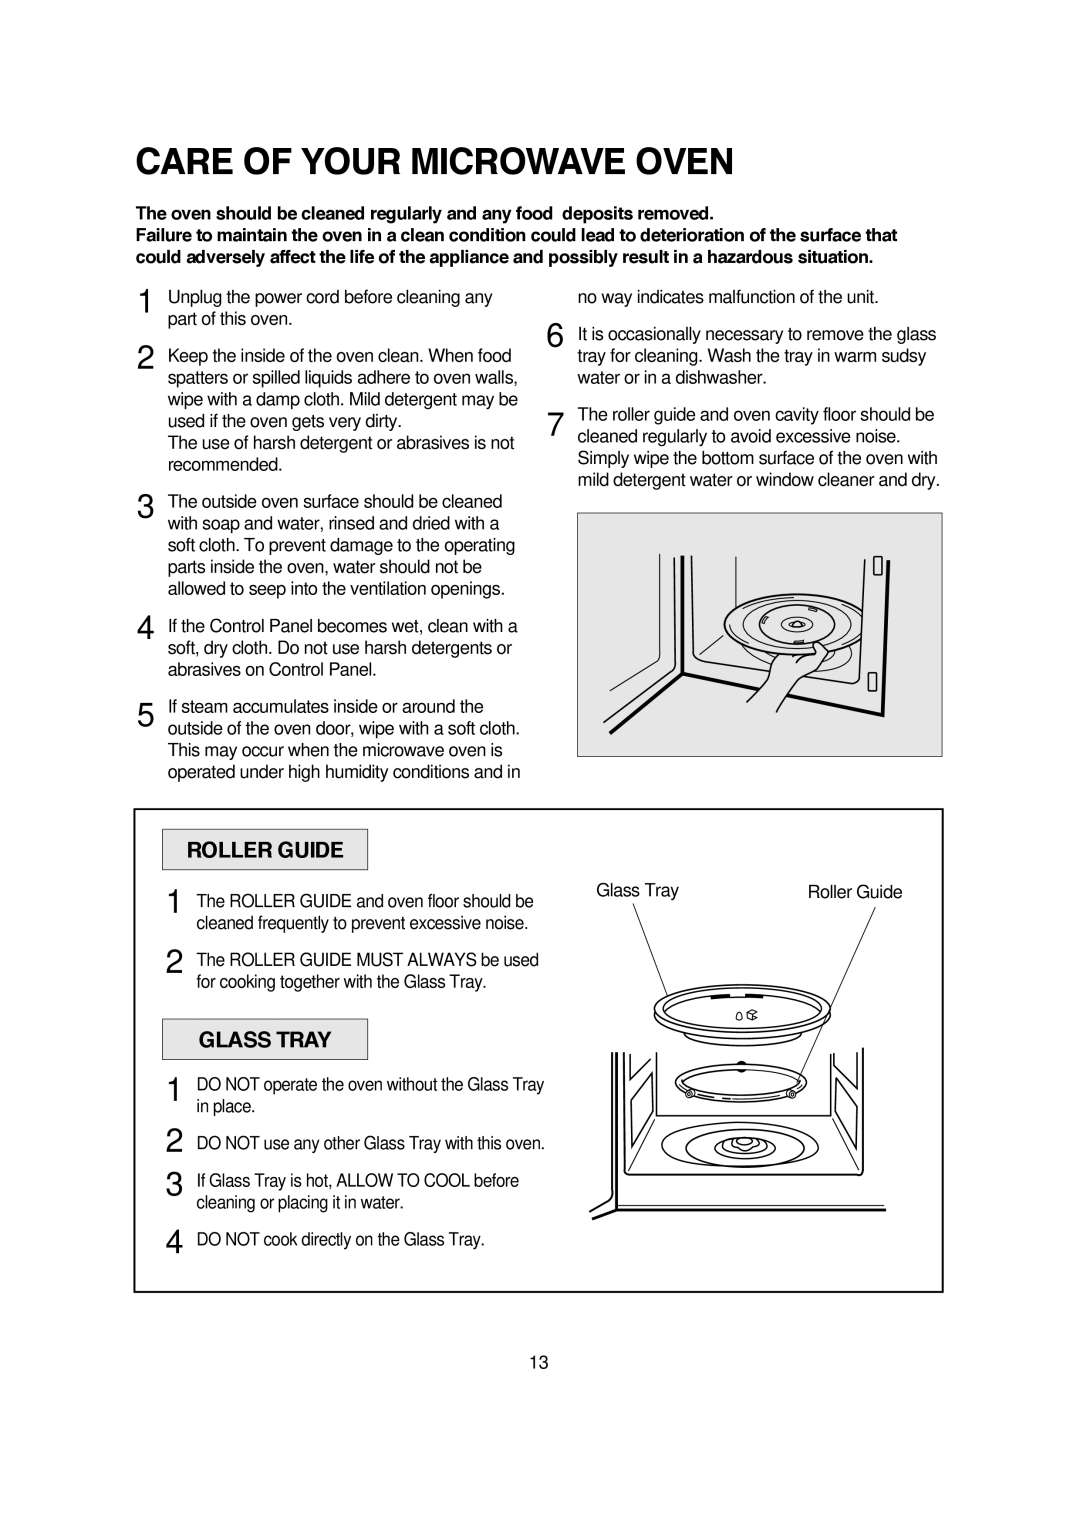 Magic Chef MCM990ST instruction manual Care Of Your Microwave Oven, Roller Guide, Glass Tray, 2 3 